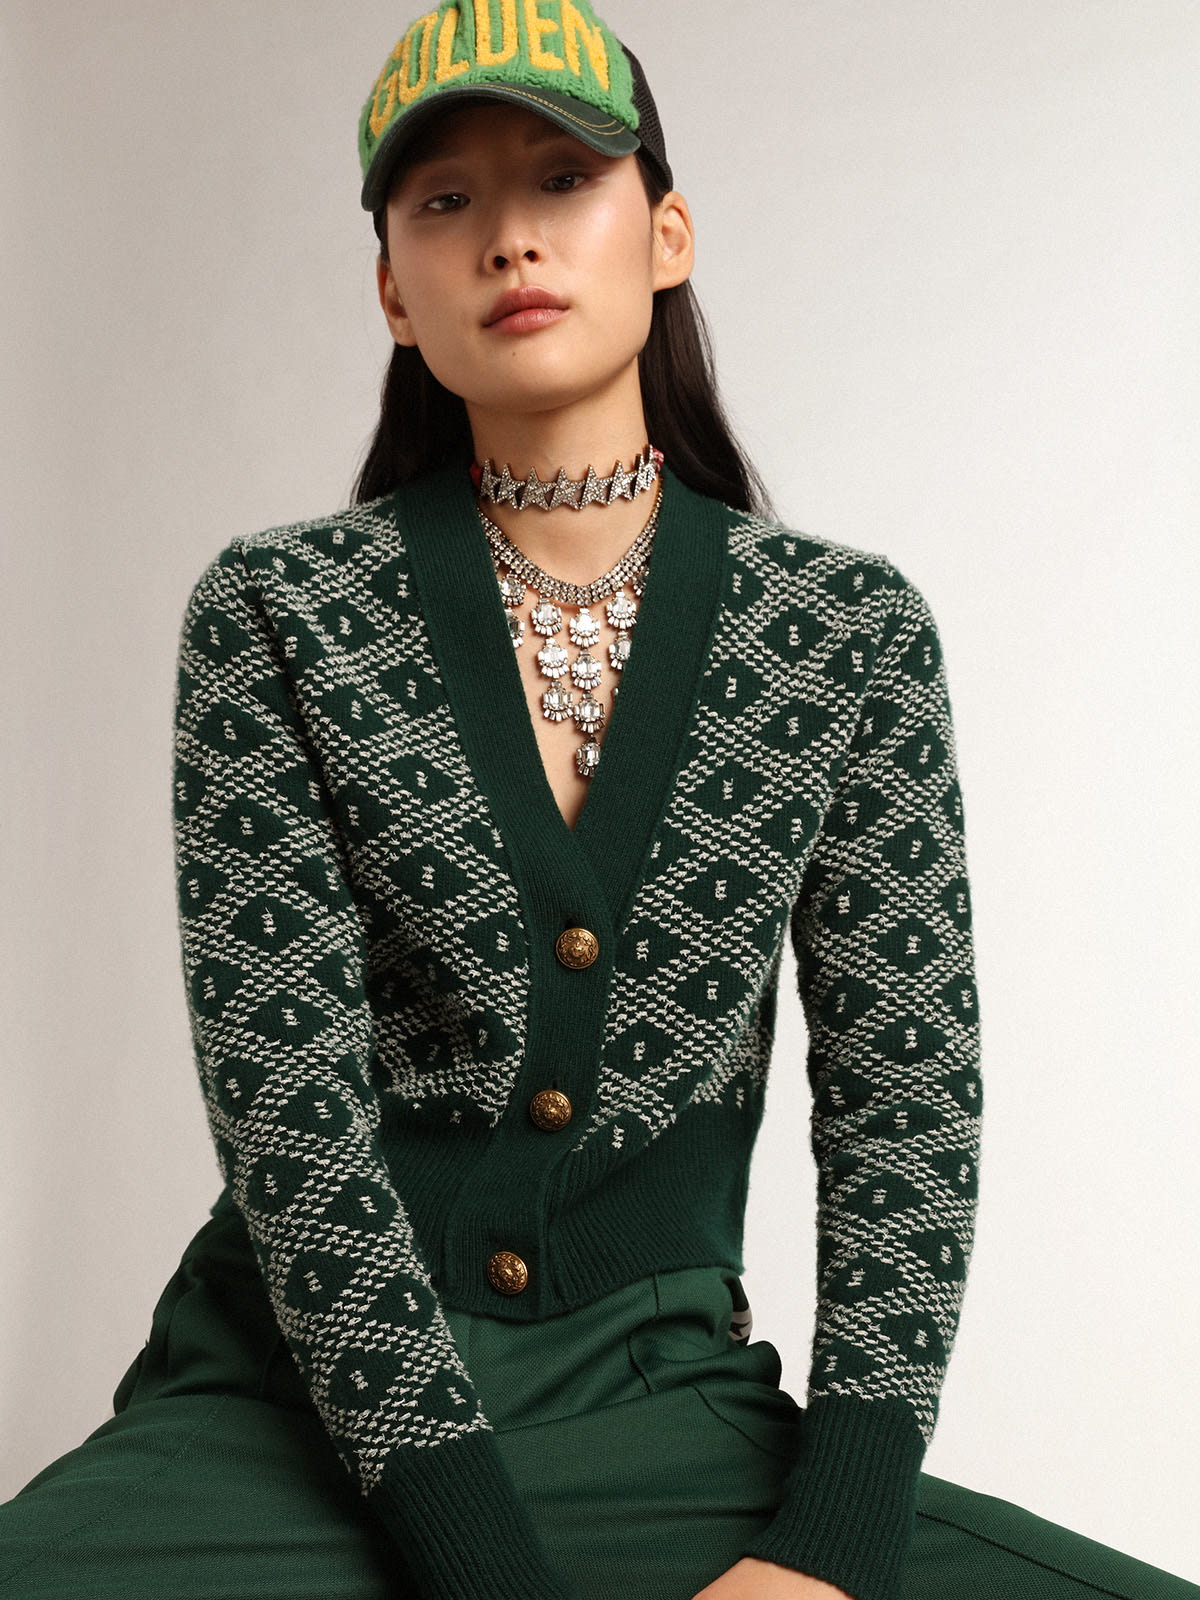 Golden Goose - Women's cropped cardigan with green and white jacquard diamond pattern in 